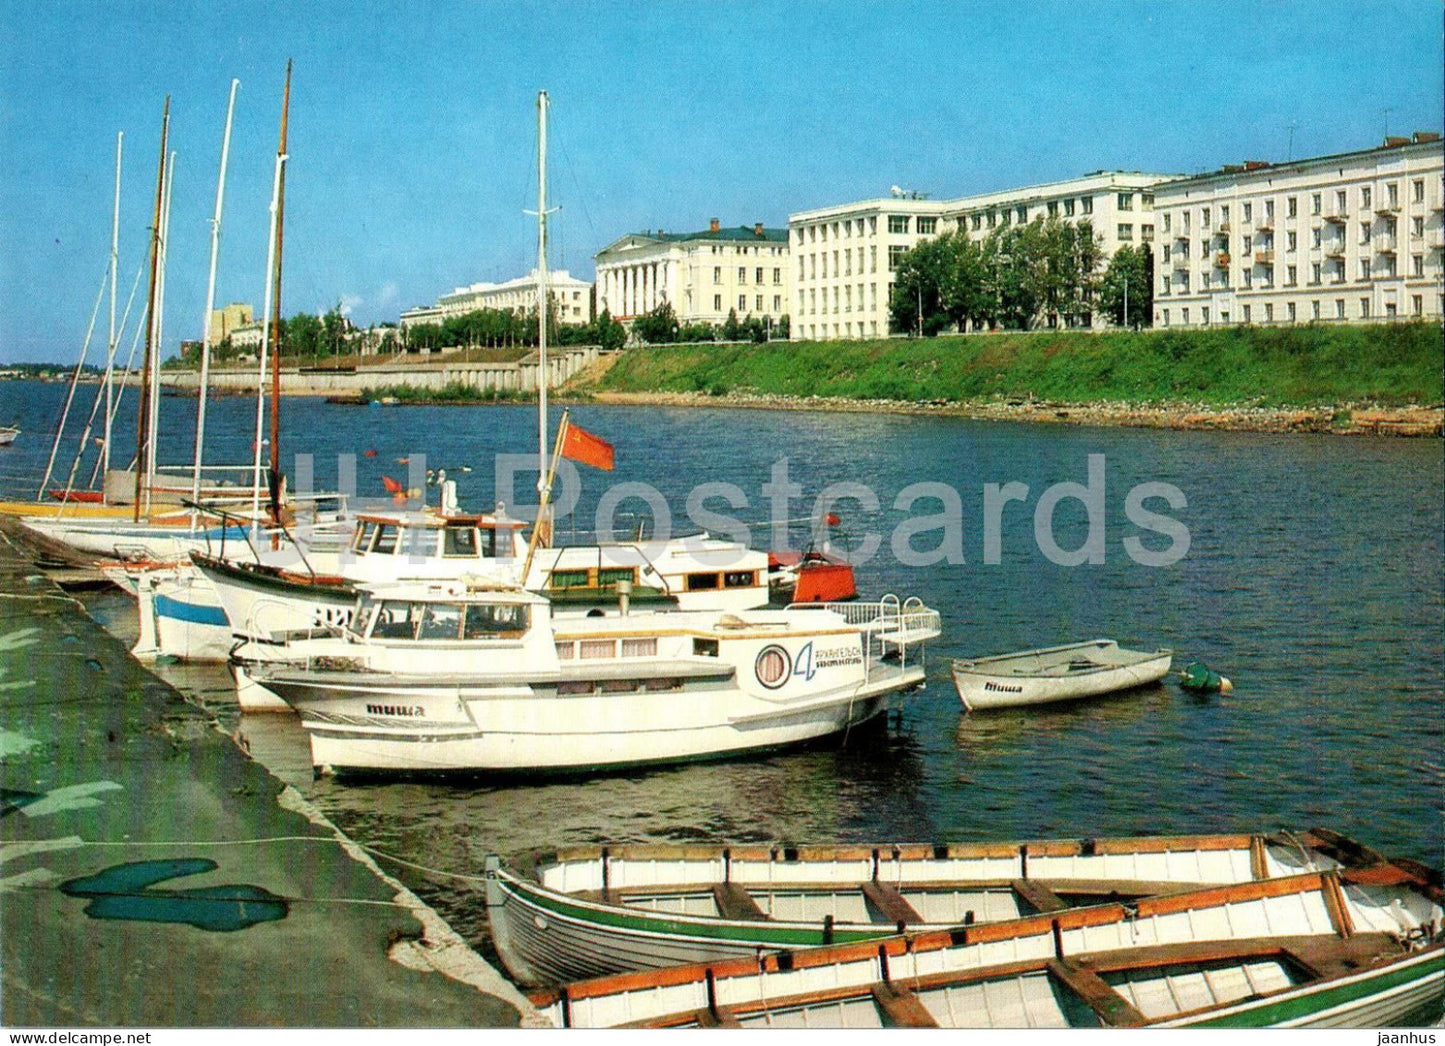 Arkhangelsk - Yacht Club - sailing boat - 1989 - Russia USSR - unused - JH Postcards